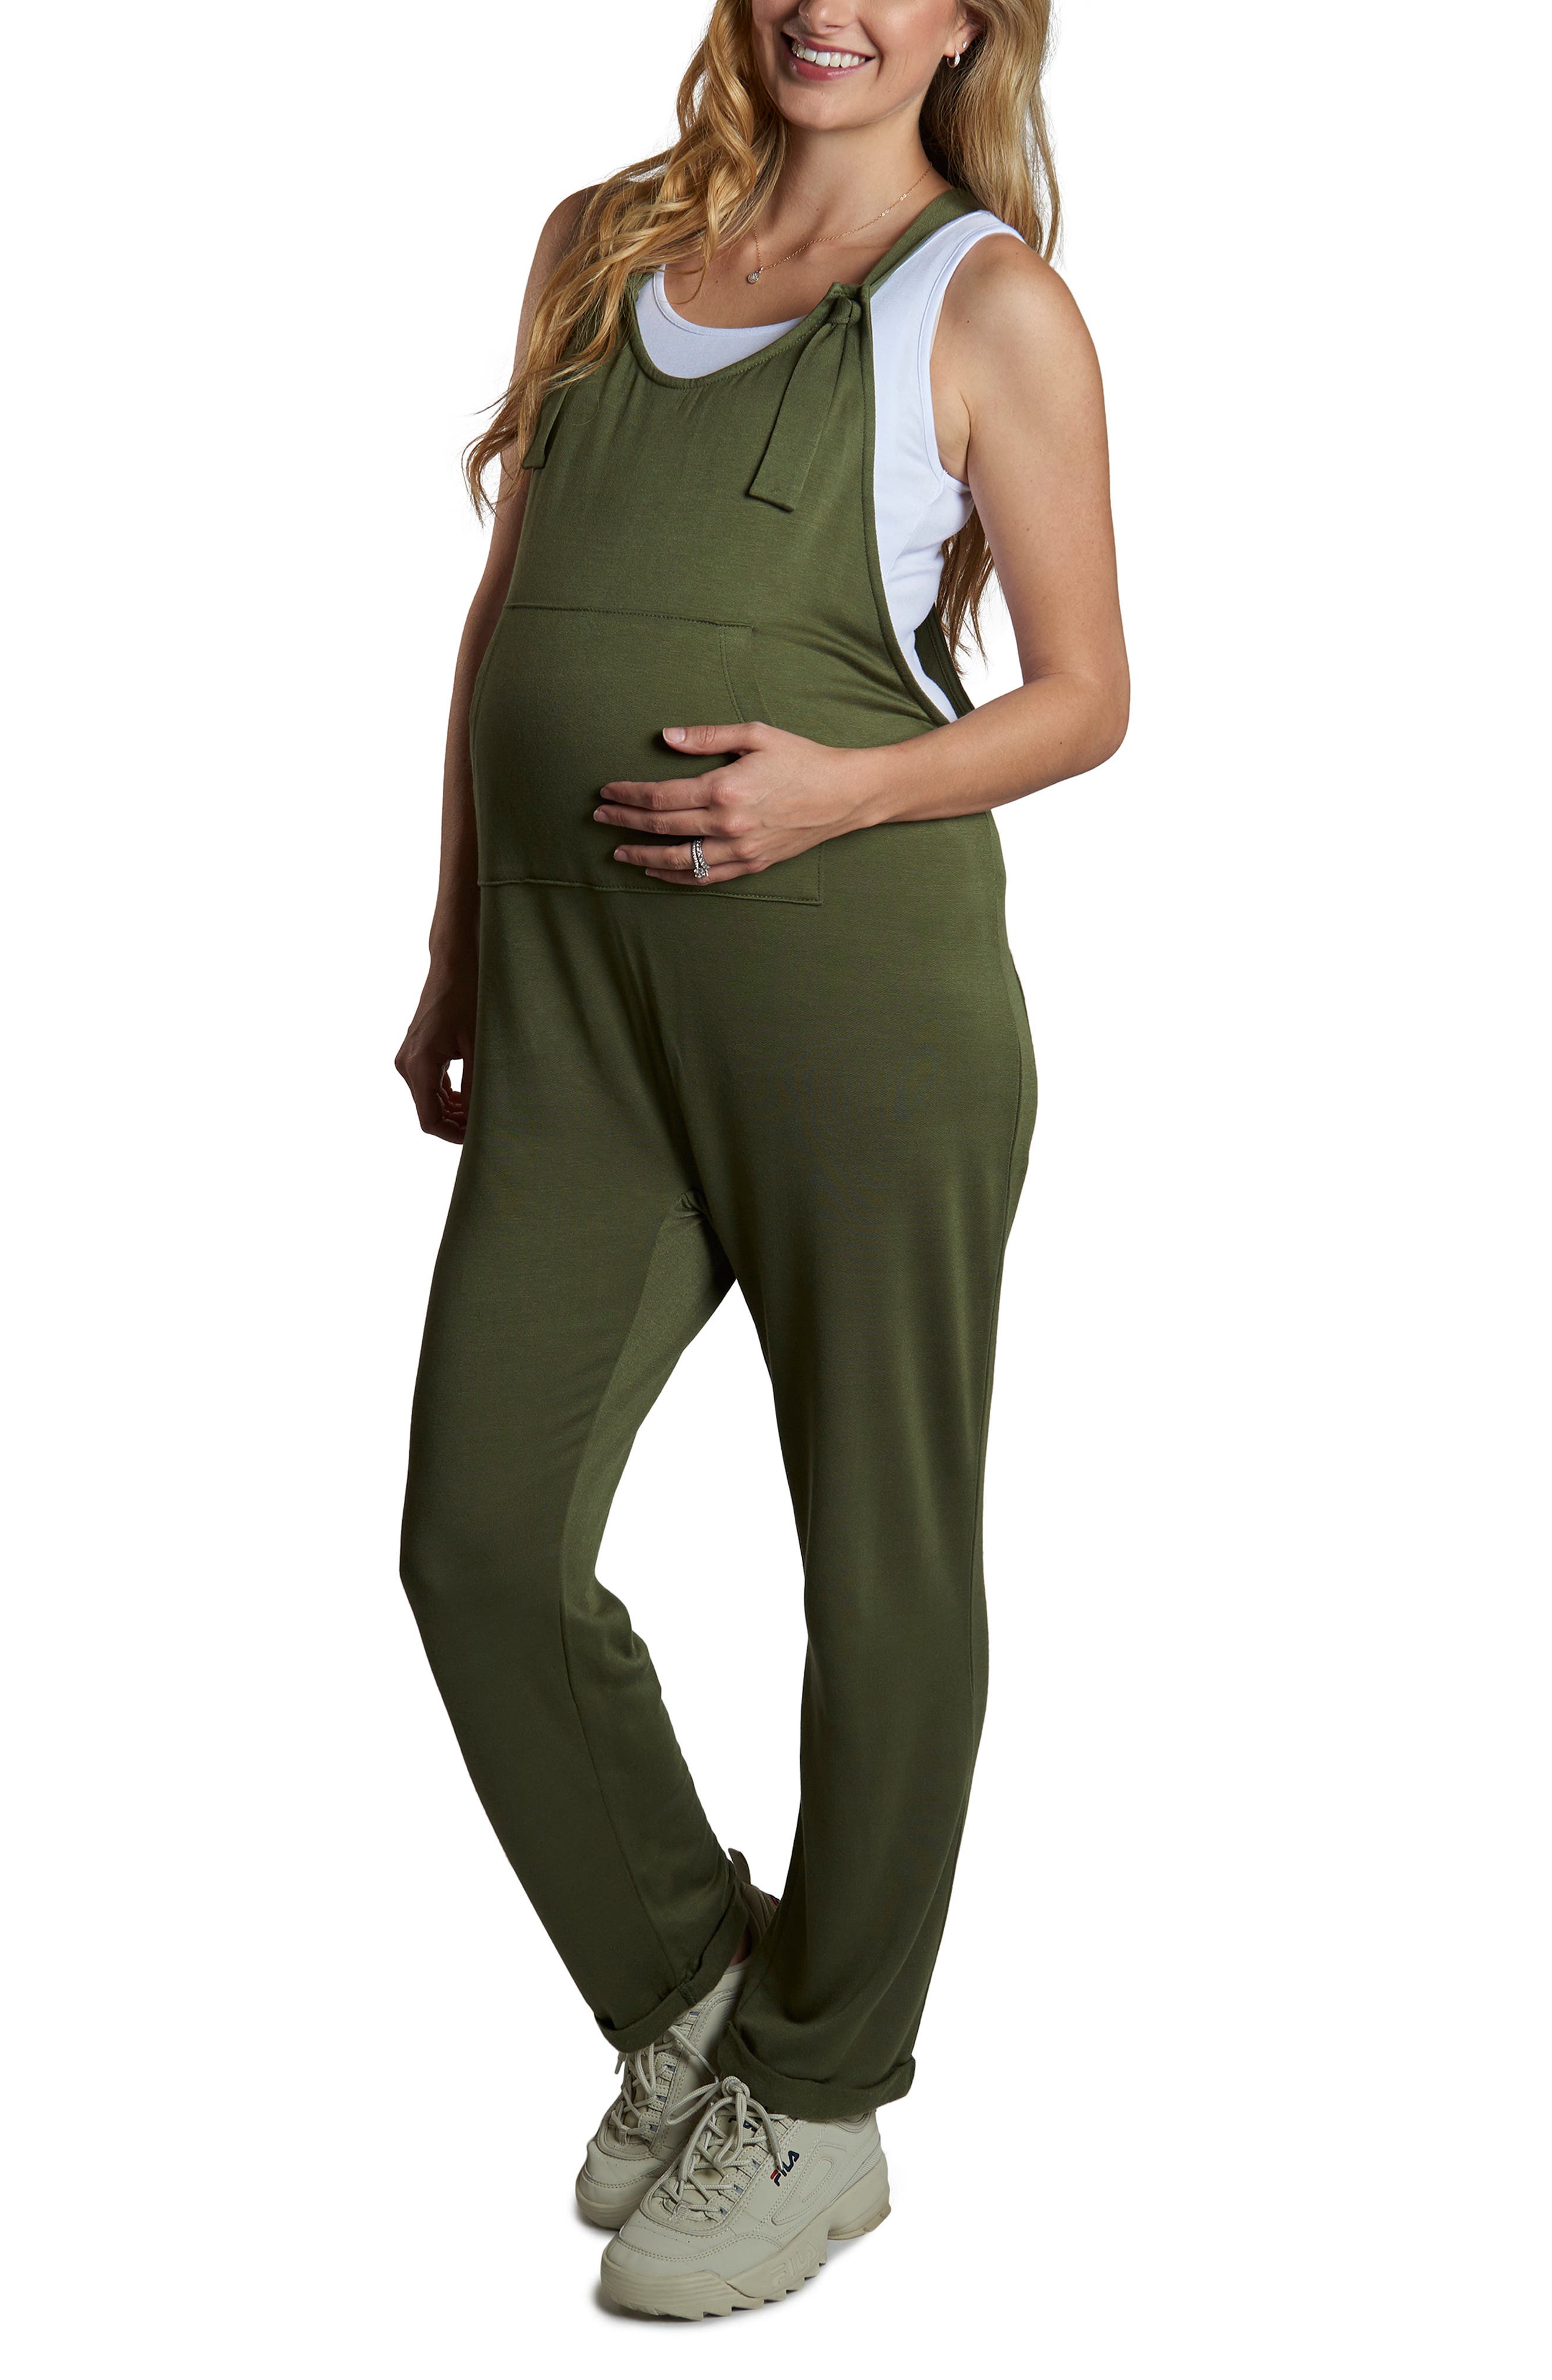 Everly Grey Natalie Maternity/Nursing Knit Overalls in French Terry Black at Nordstrom